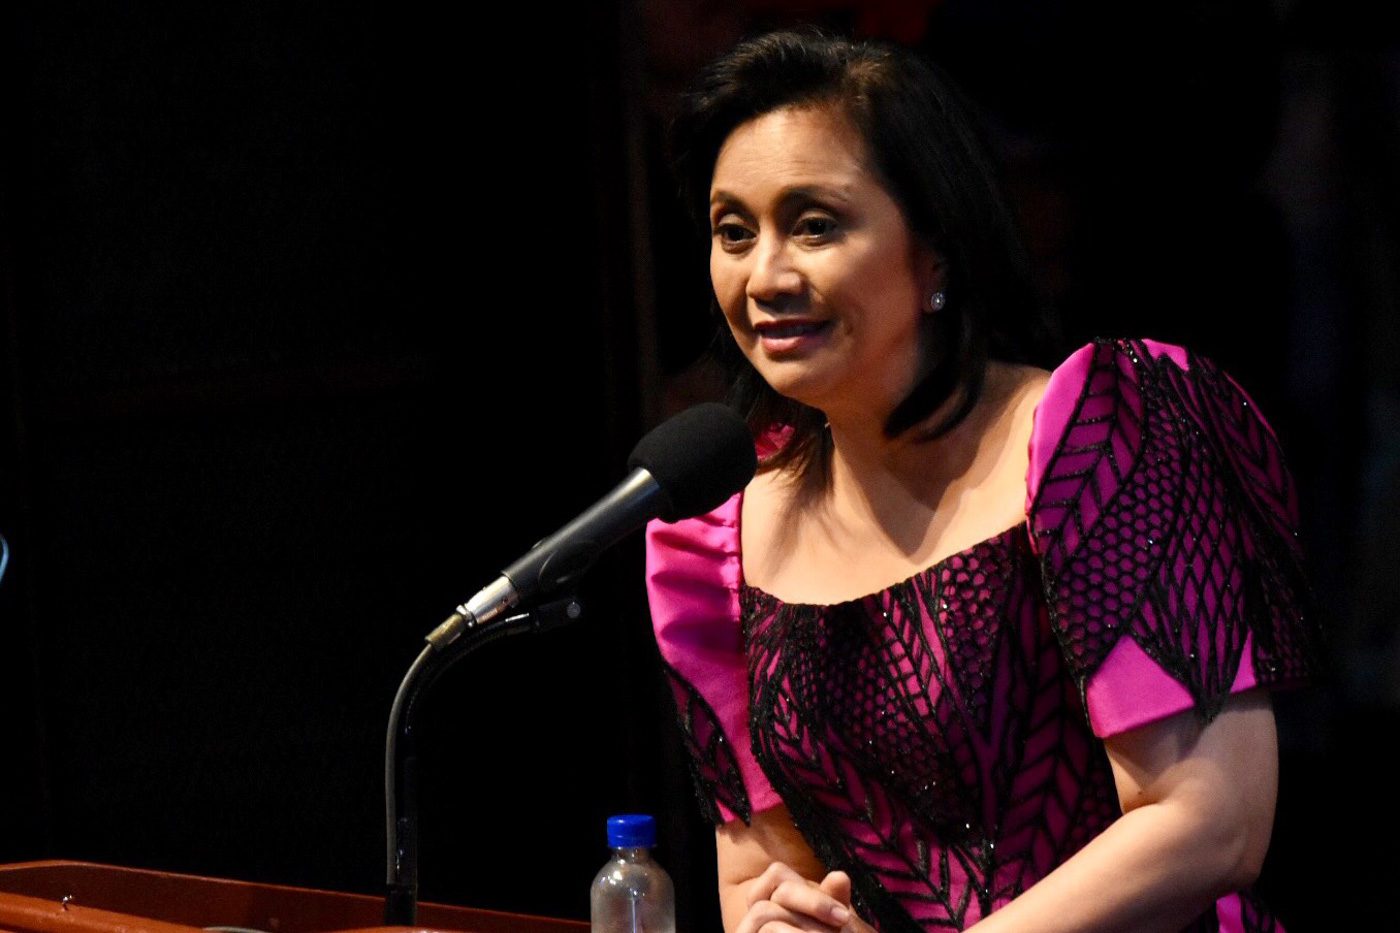 Robredo: Courage and empathy, not dictatorship, improves lives